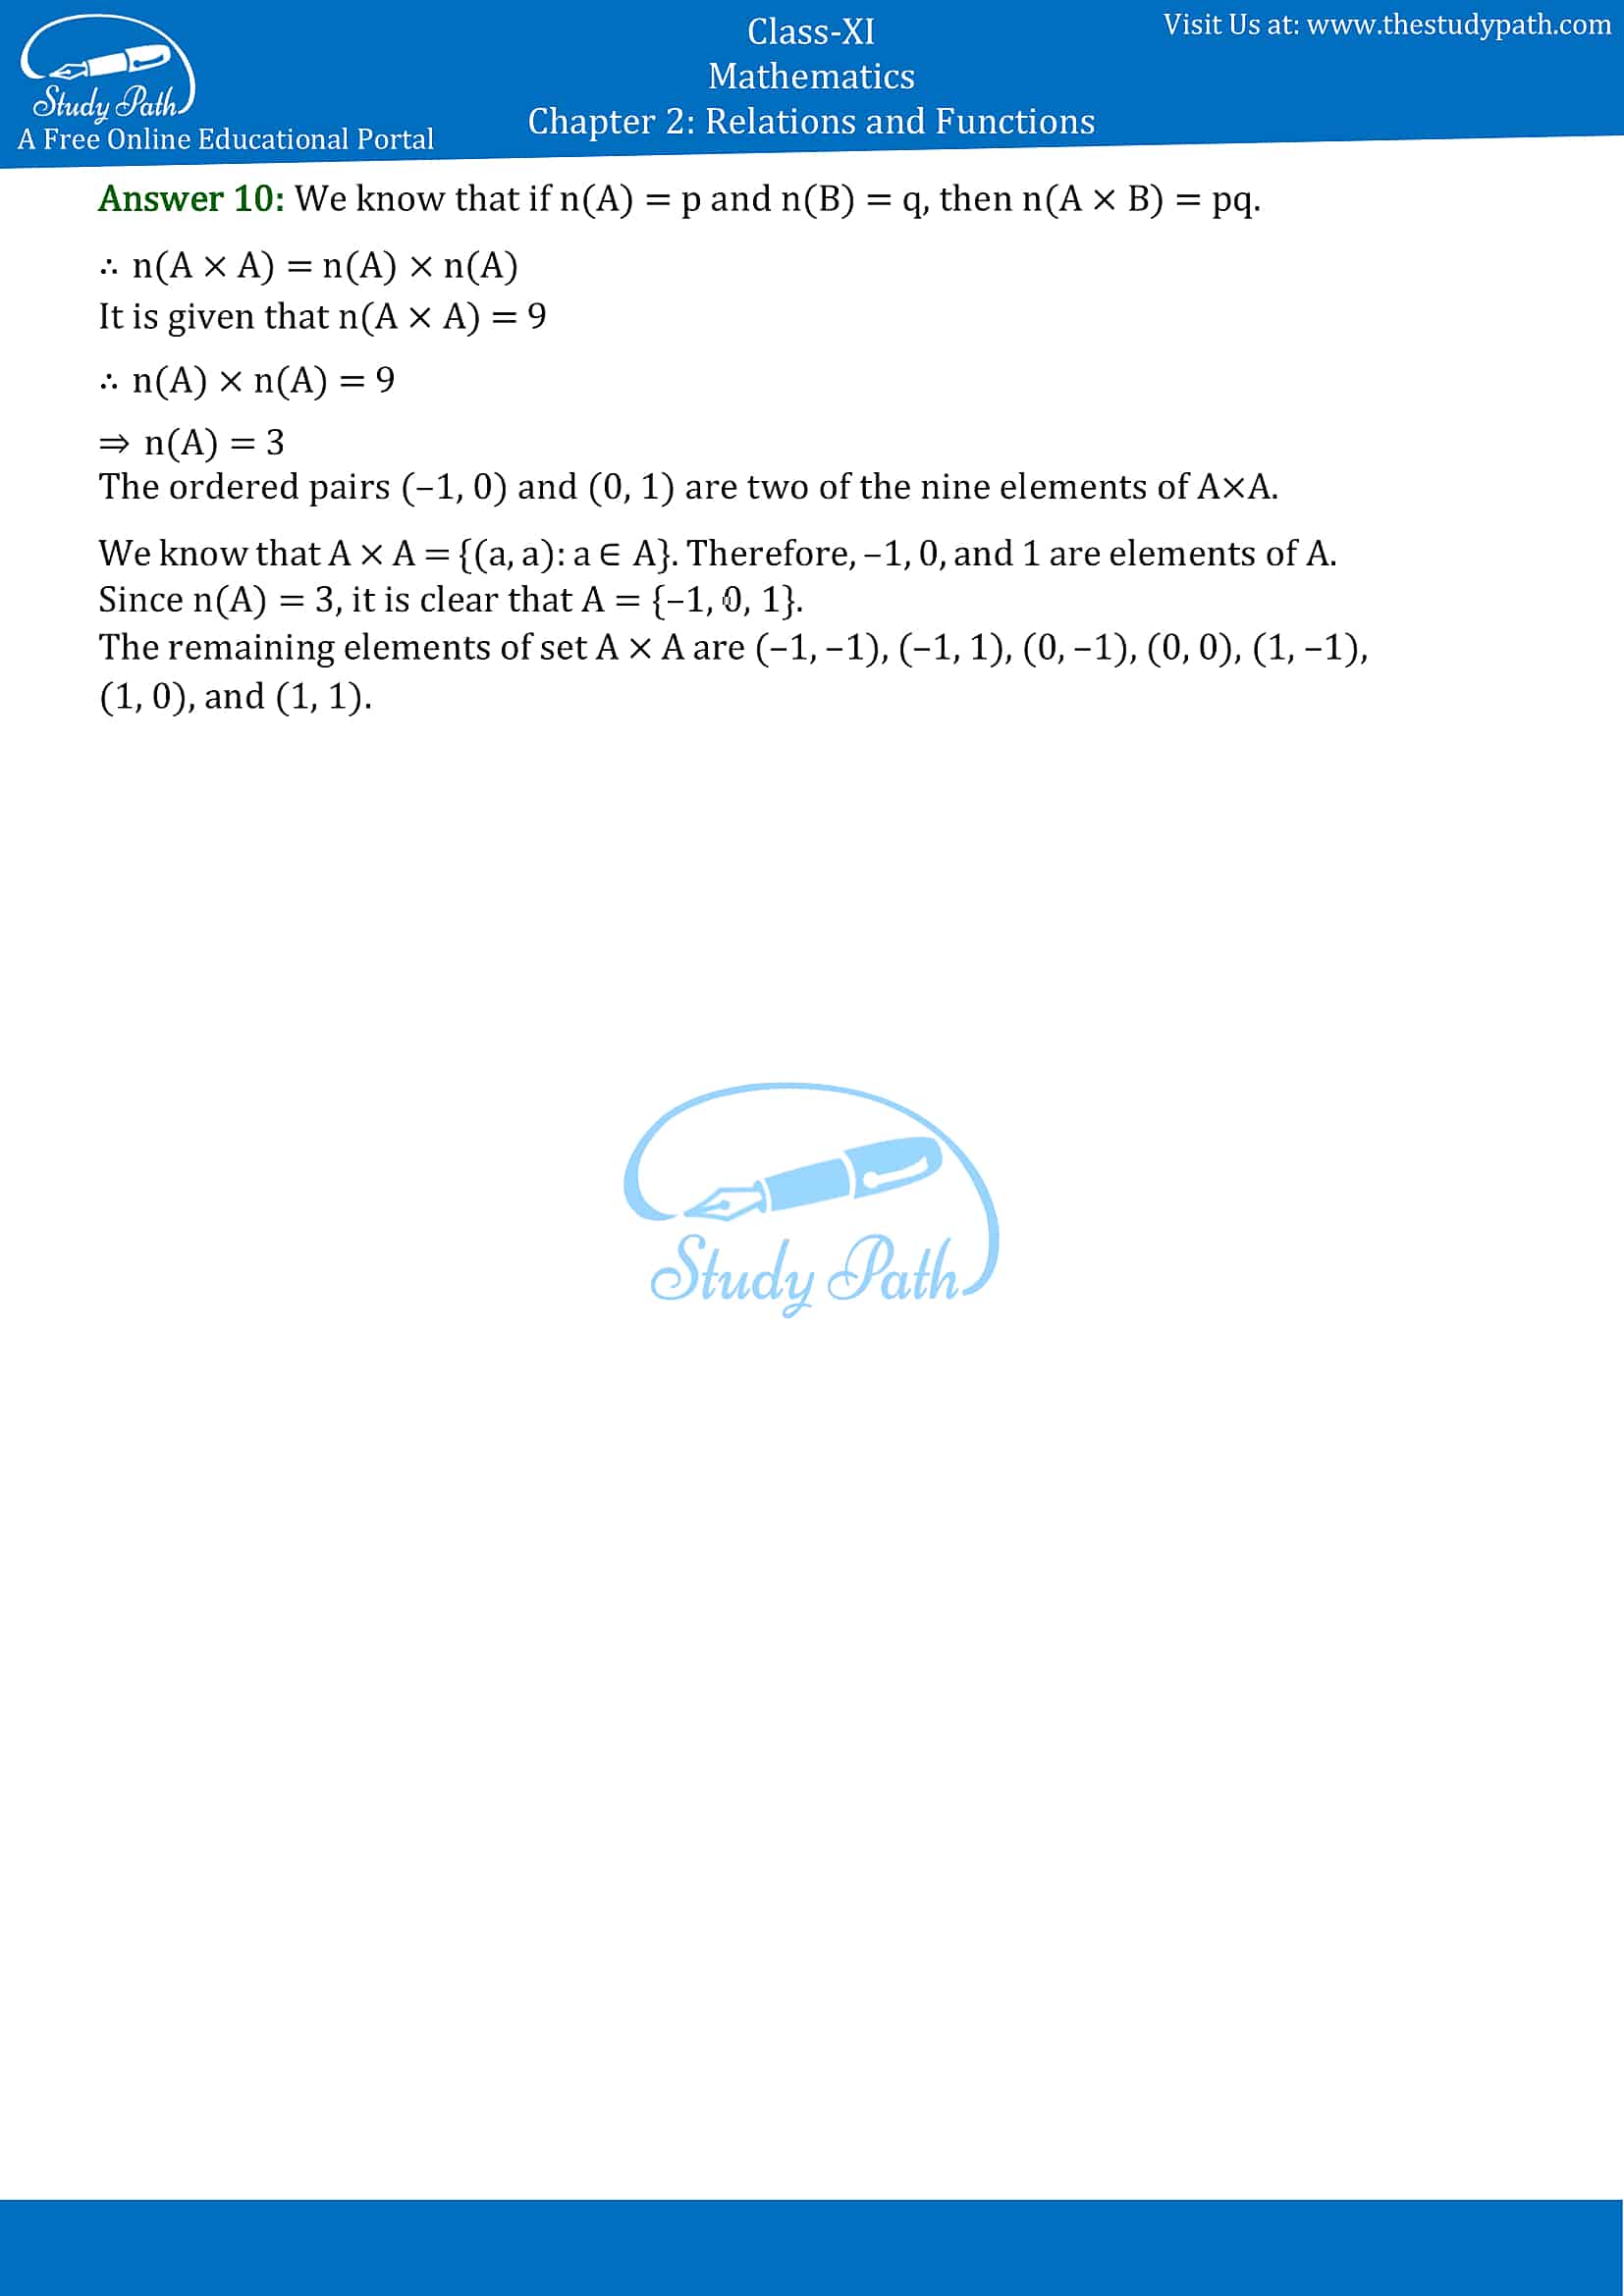 NCERT Solutions for Class 11 Maths Chapter 2 Relations and Functions Exercise 2.1